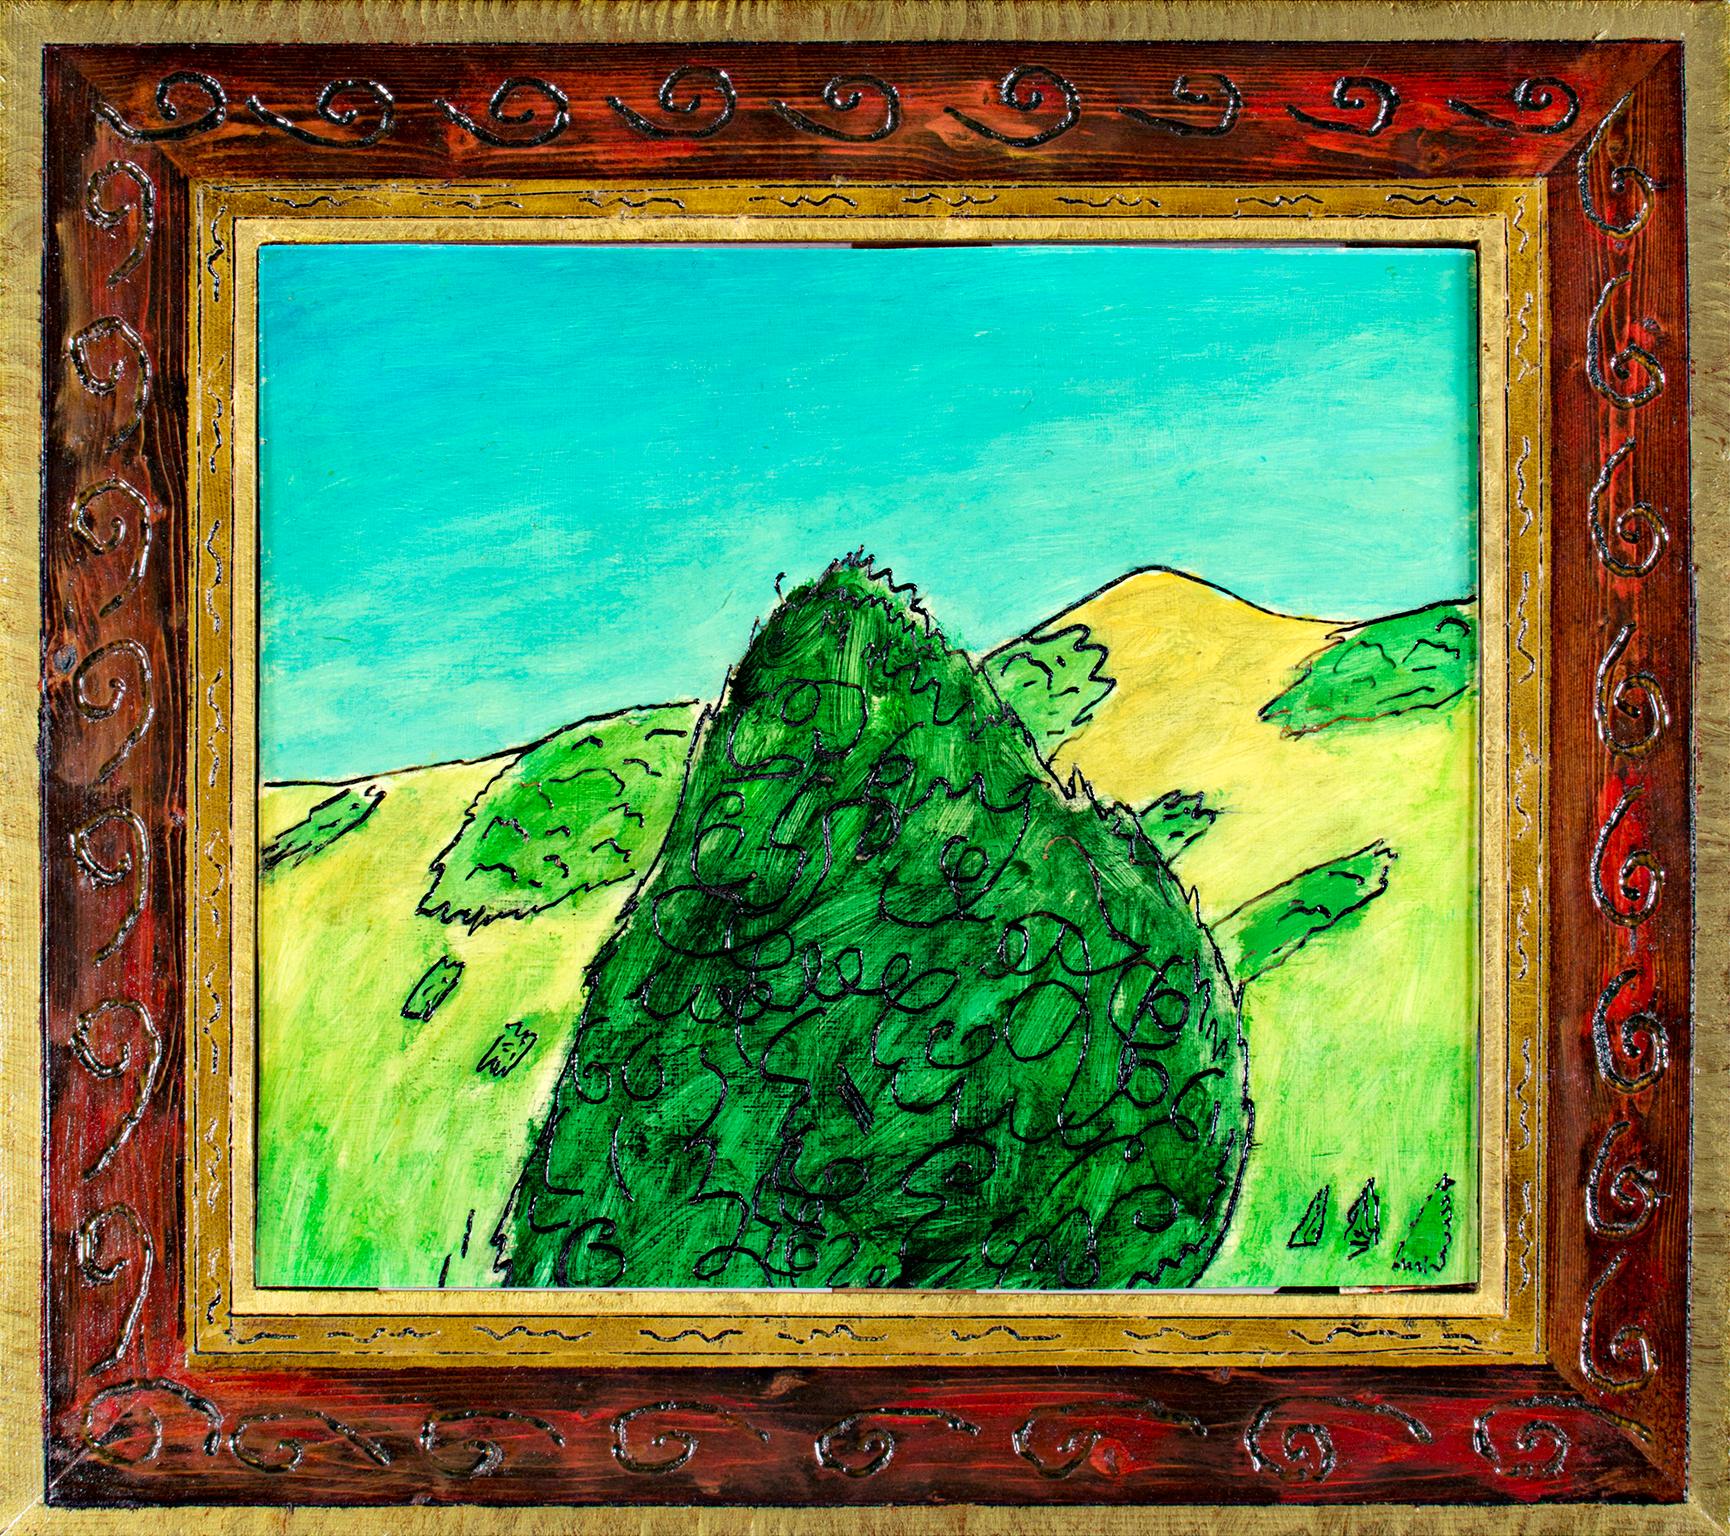 "Bodega Mountain," is an original oil painting on wood, signed on the verso. The frame was created and hand-carved by the artist, which makes it an integral part of the work. The image shows rolling hills in vibrant green and yellow rising to meet a